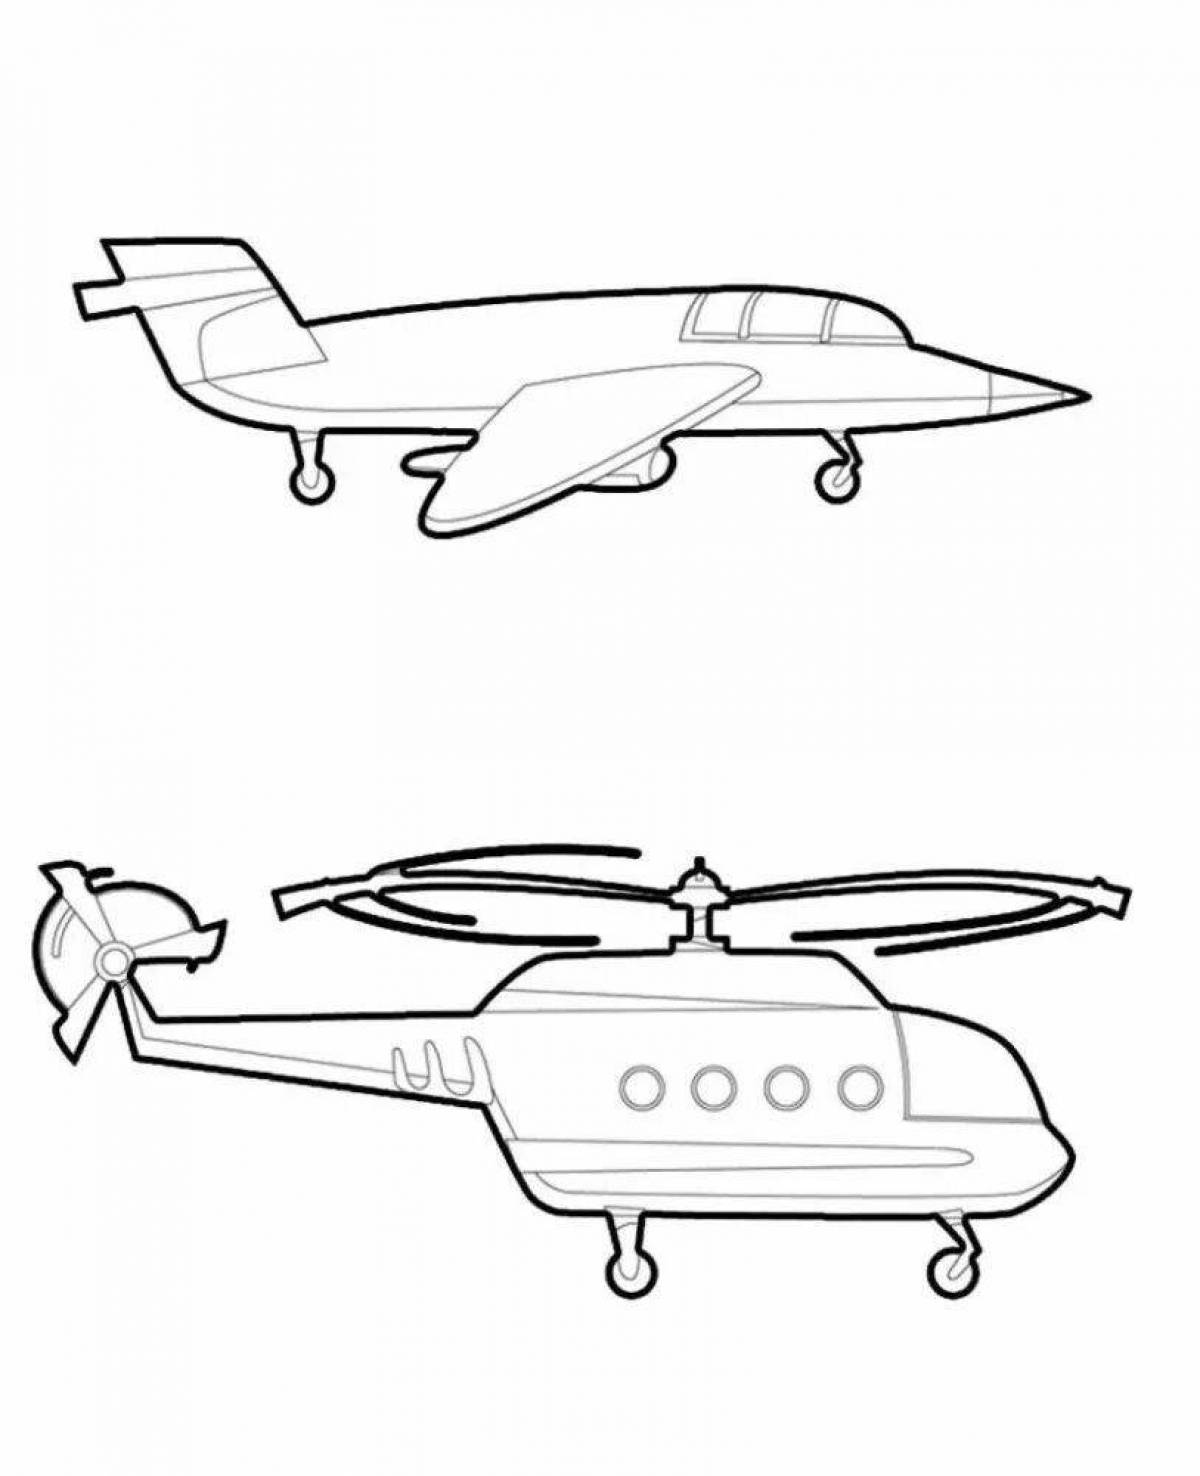 Gorgeous planes and helicopters coloring book